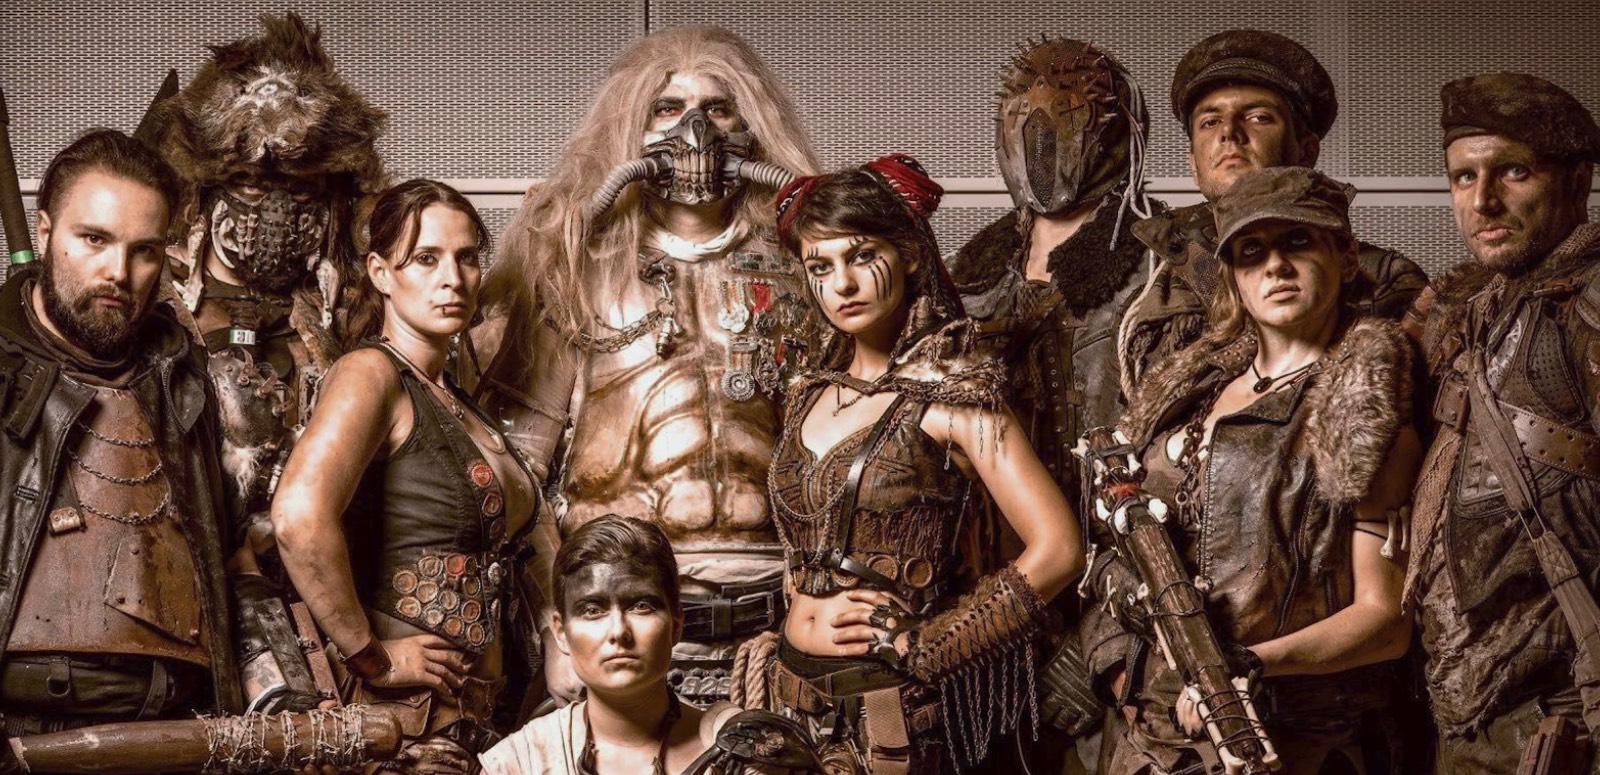 A group of Mad Max fans posing in Fury Road cosplay